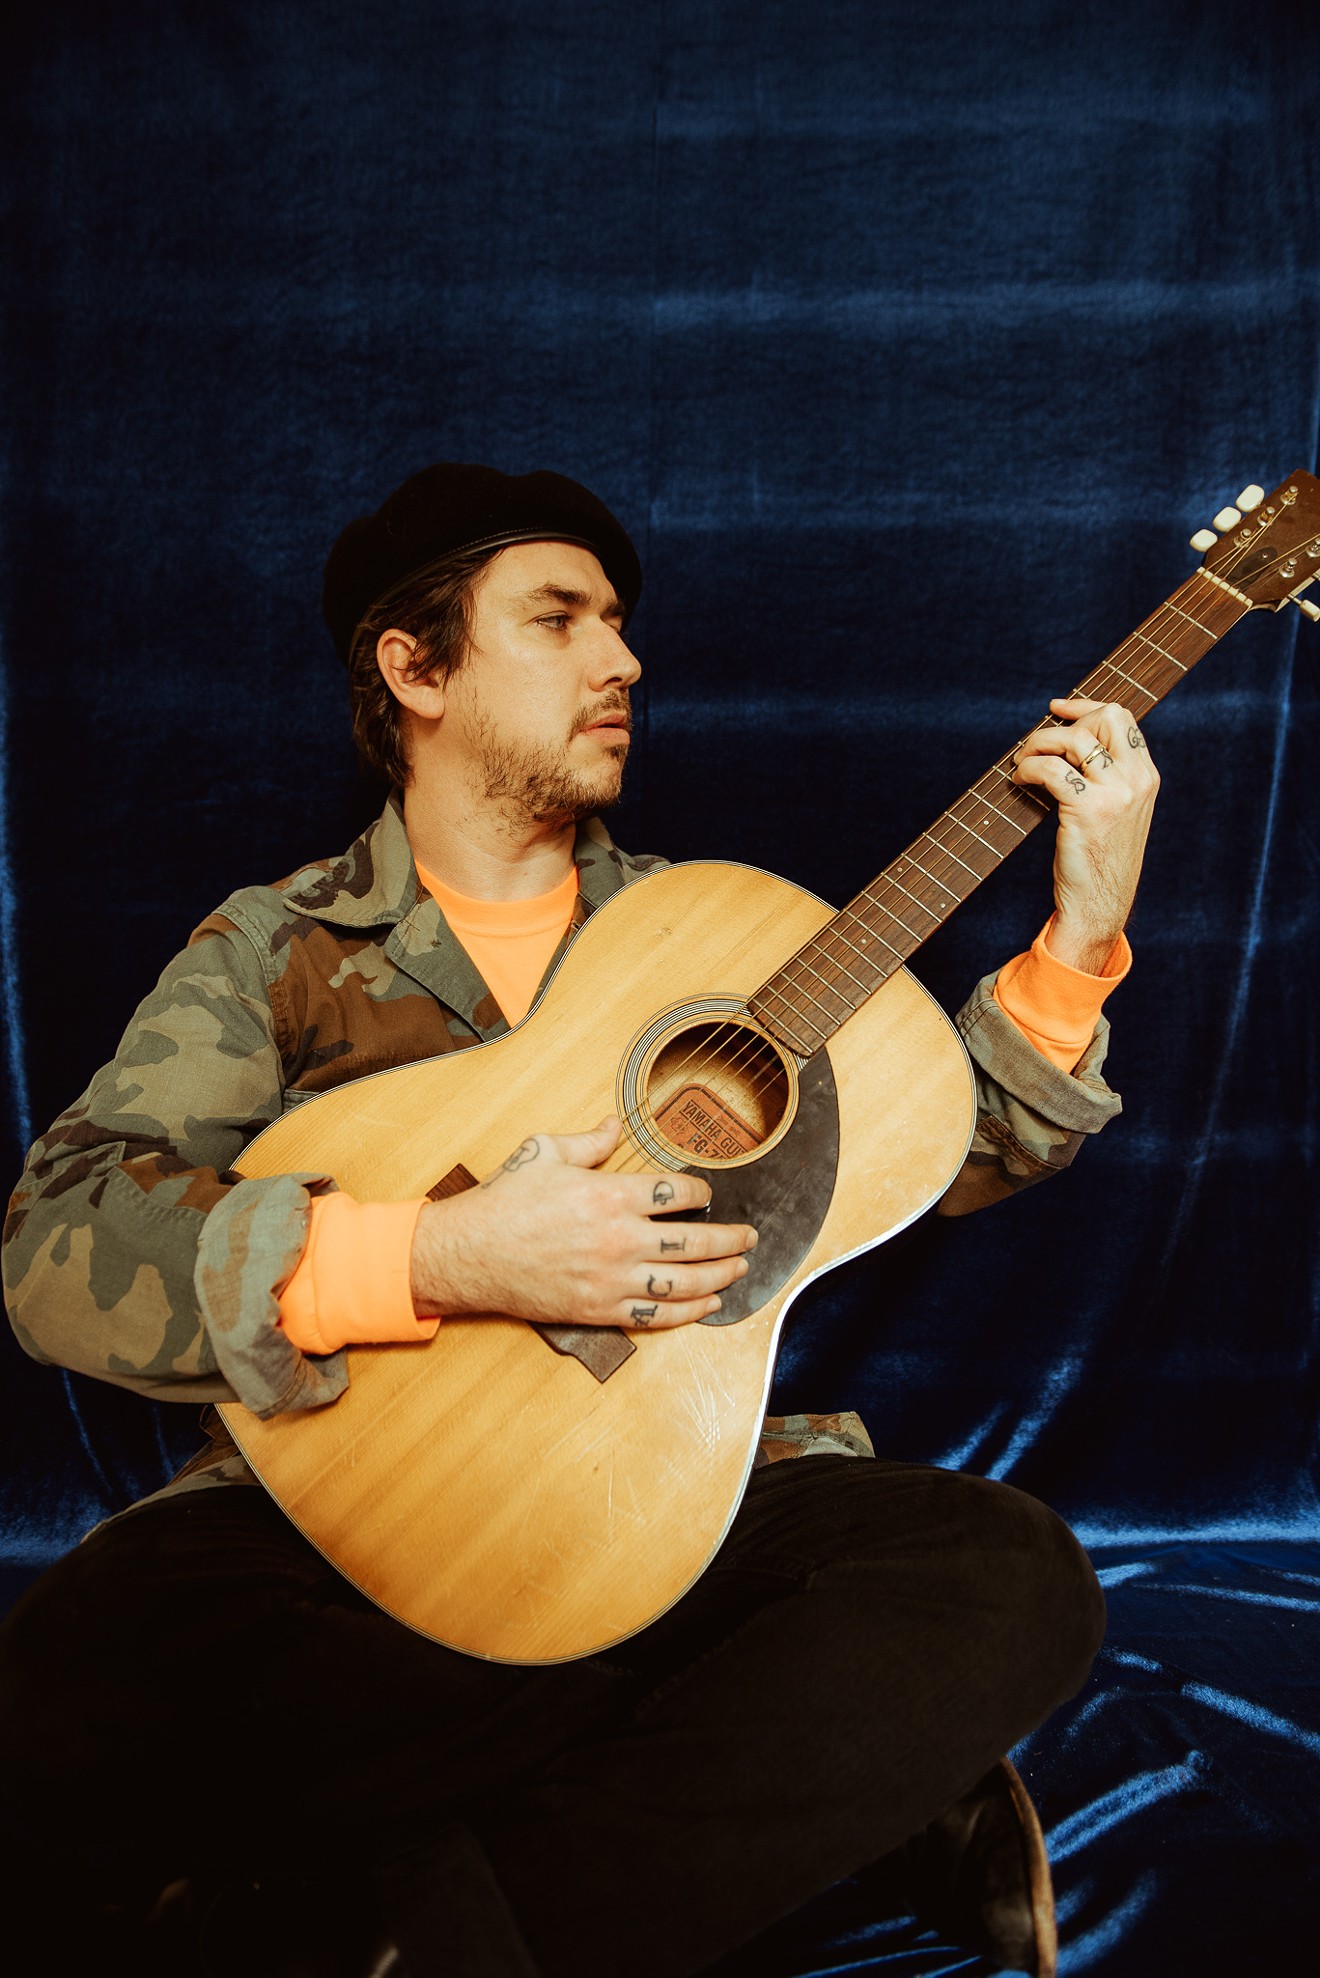 Justin Rogue performs acoustically as a member of SUSTO at a previous show. The singer-songwriter will take the stage at Service Brewing Company this summer to play a solo show.